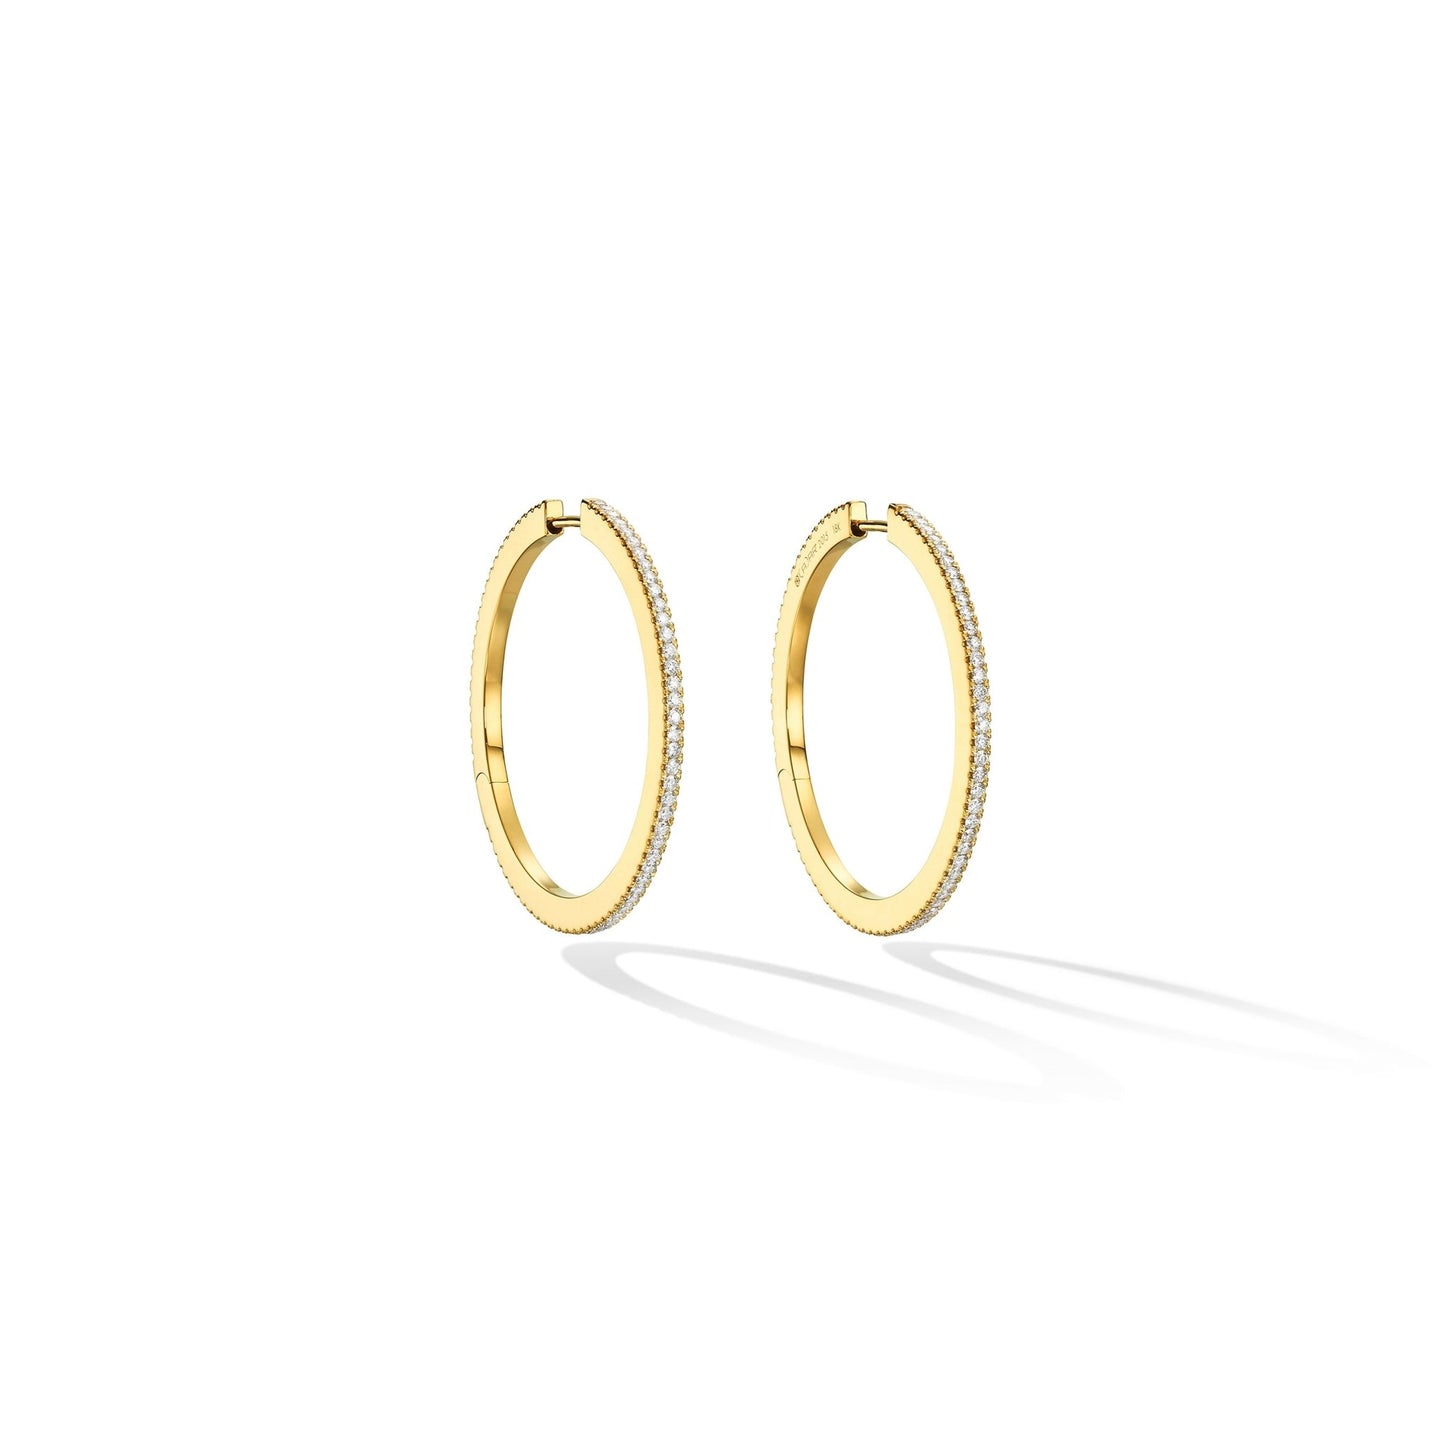 Large Yellow Gold Solo Hoop Earrings with White and Black Diamonds - Cadar